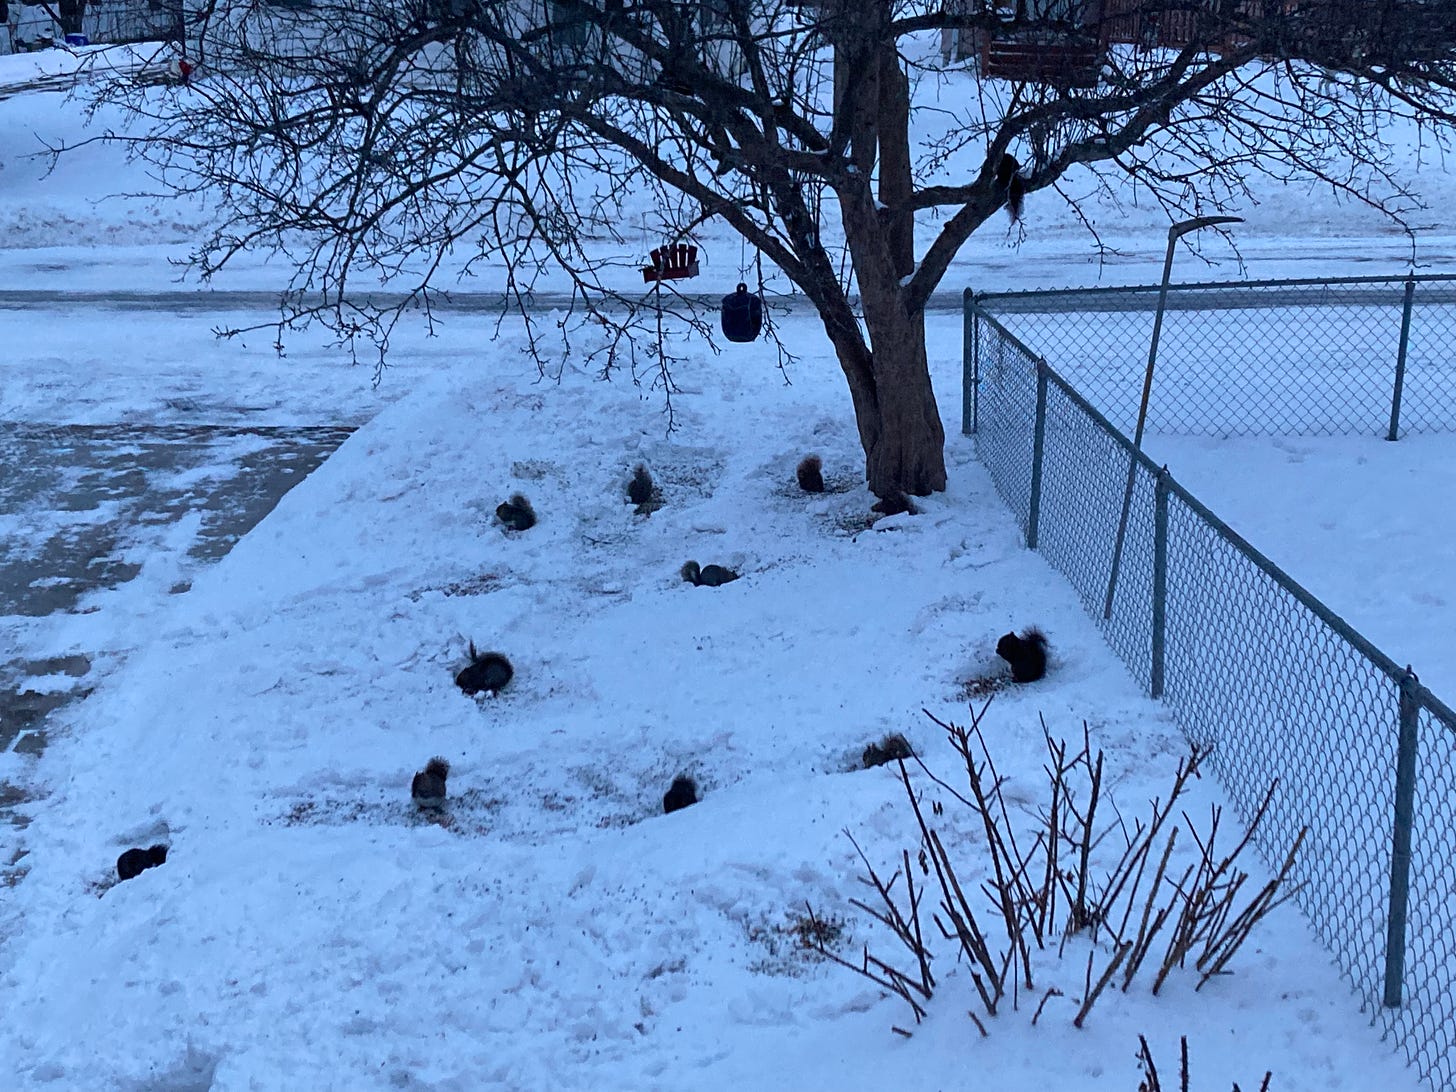 Numerous squirrels eating seeds under a bare tree next to a chainlink fence in the snow.